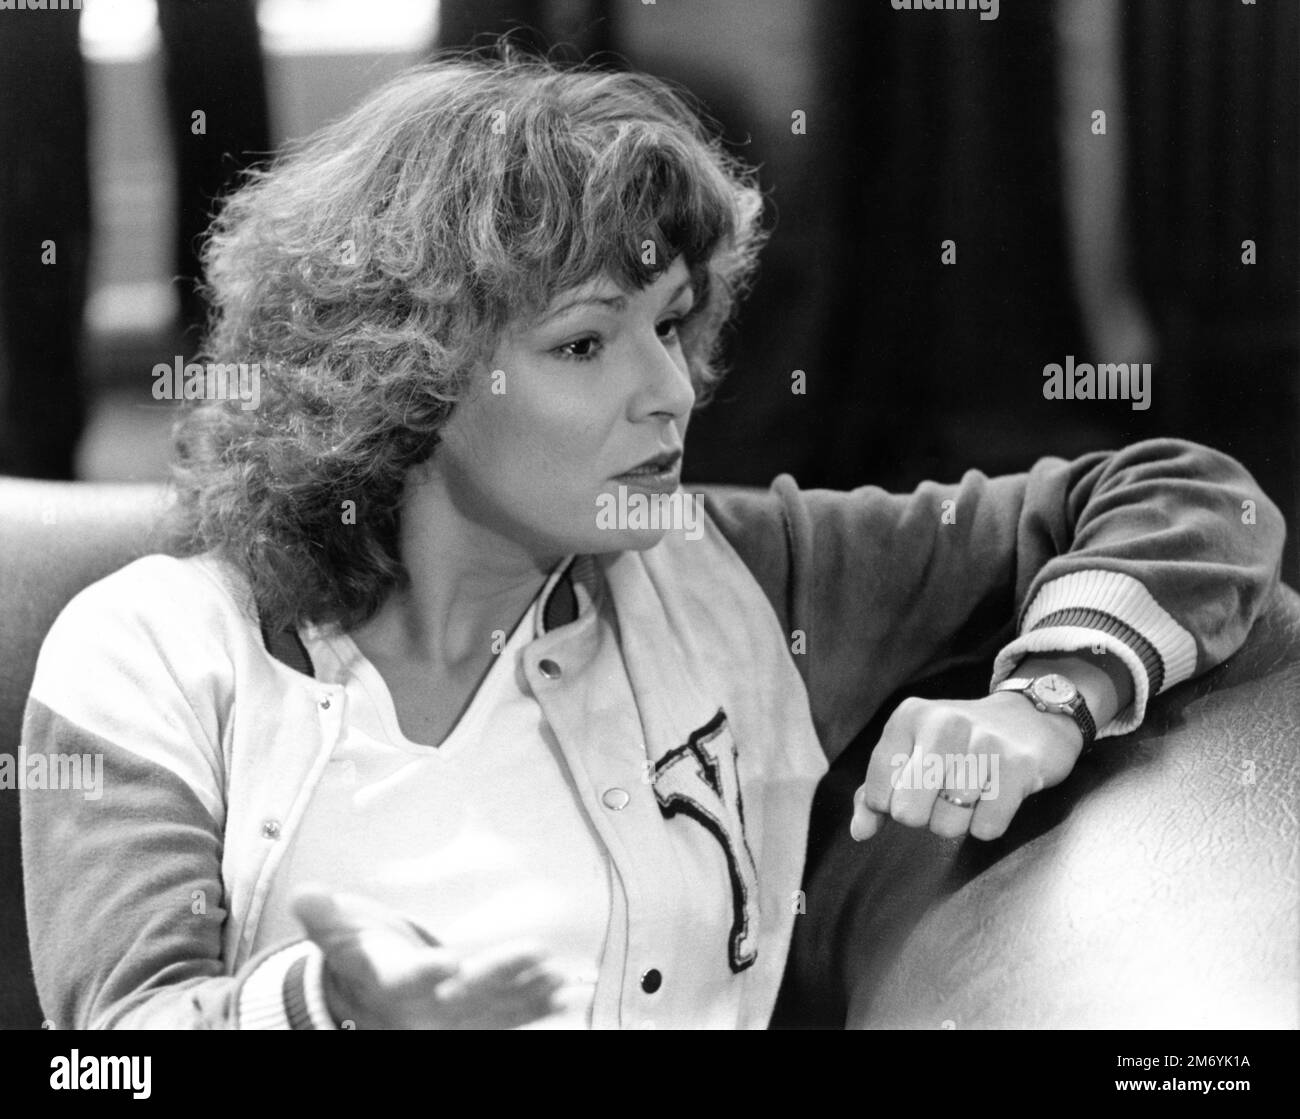 JULIE WALTERS in EDUCATING RITA 1983 director LEWIS GILBERT play / screenplay Willy Russell music David Hentschel costume design Candy Paterson Acorn Pictures / Rank Film Distributors Stock Photo